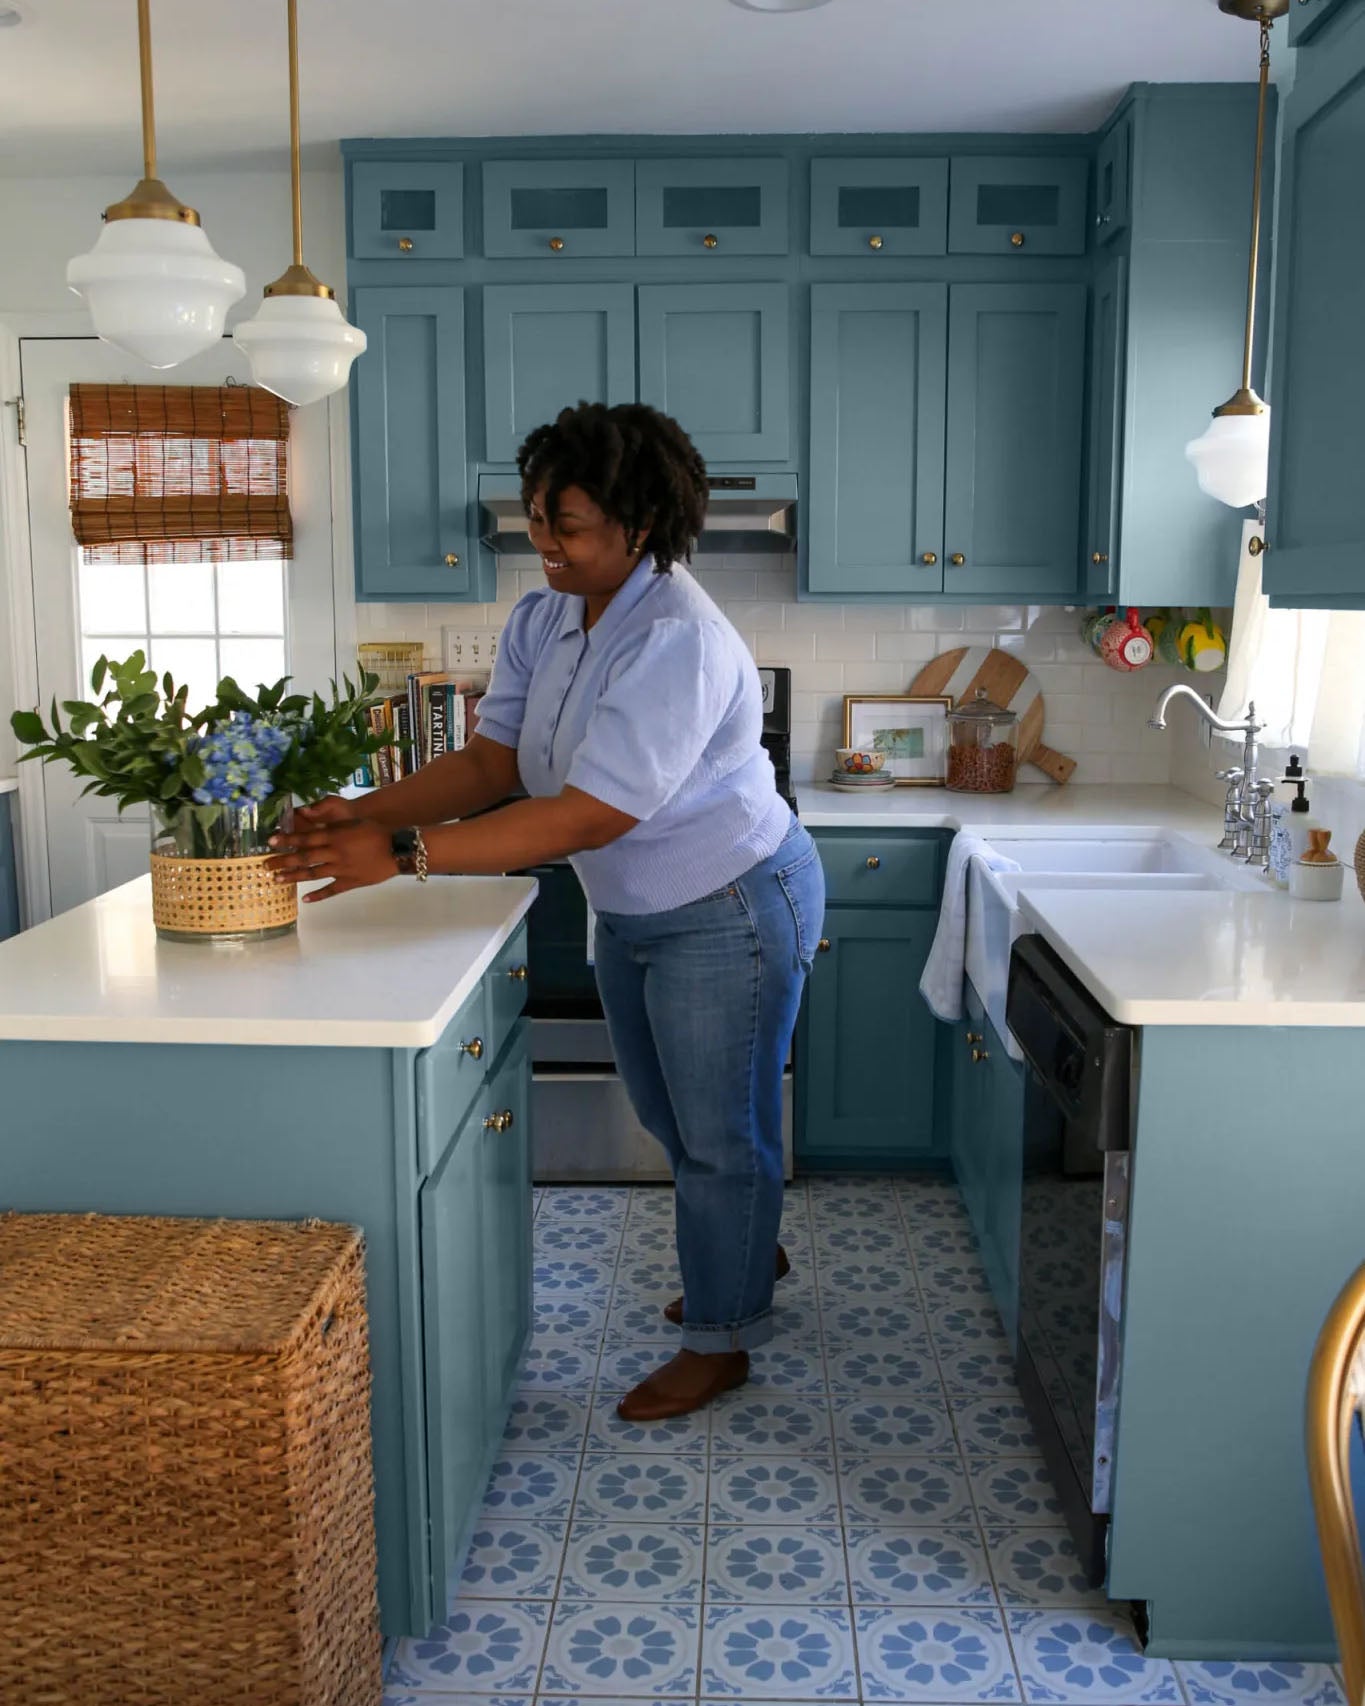 These Blue Kitchen Cabinets are Coastal Grandmother Perfection. And they’re proof you don’t need to spend a ton to refresh your space. Here’s how to pull off a budget-friendly refresh with blue kitchen cabinets.